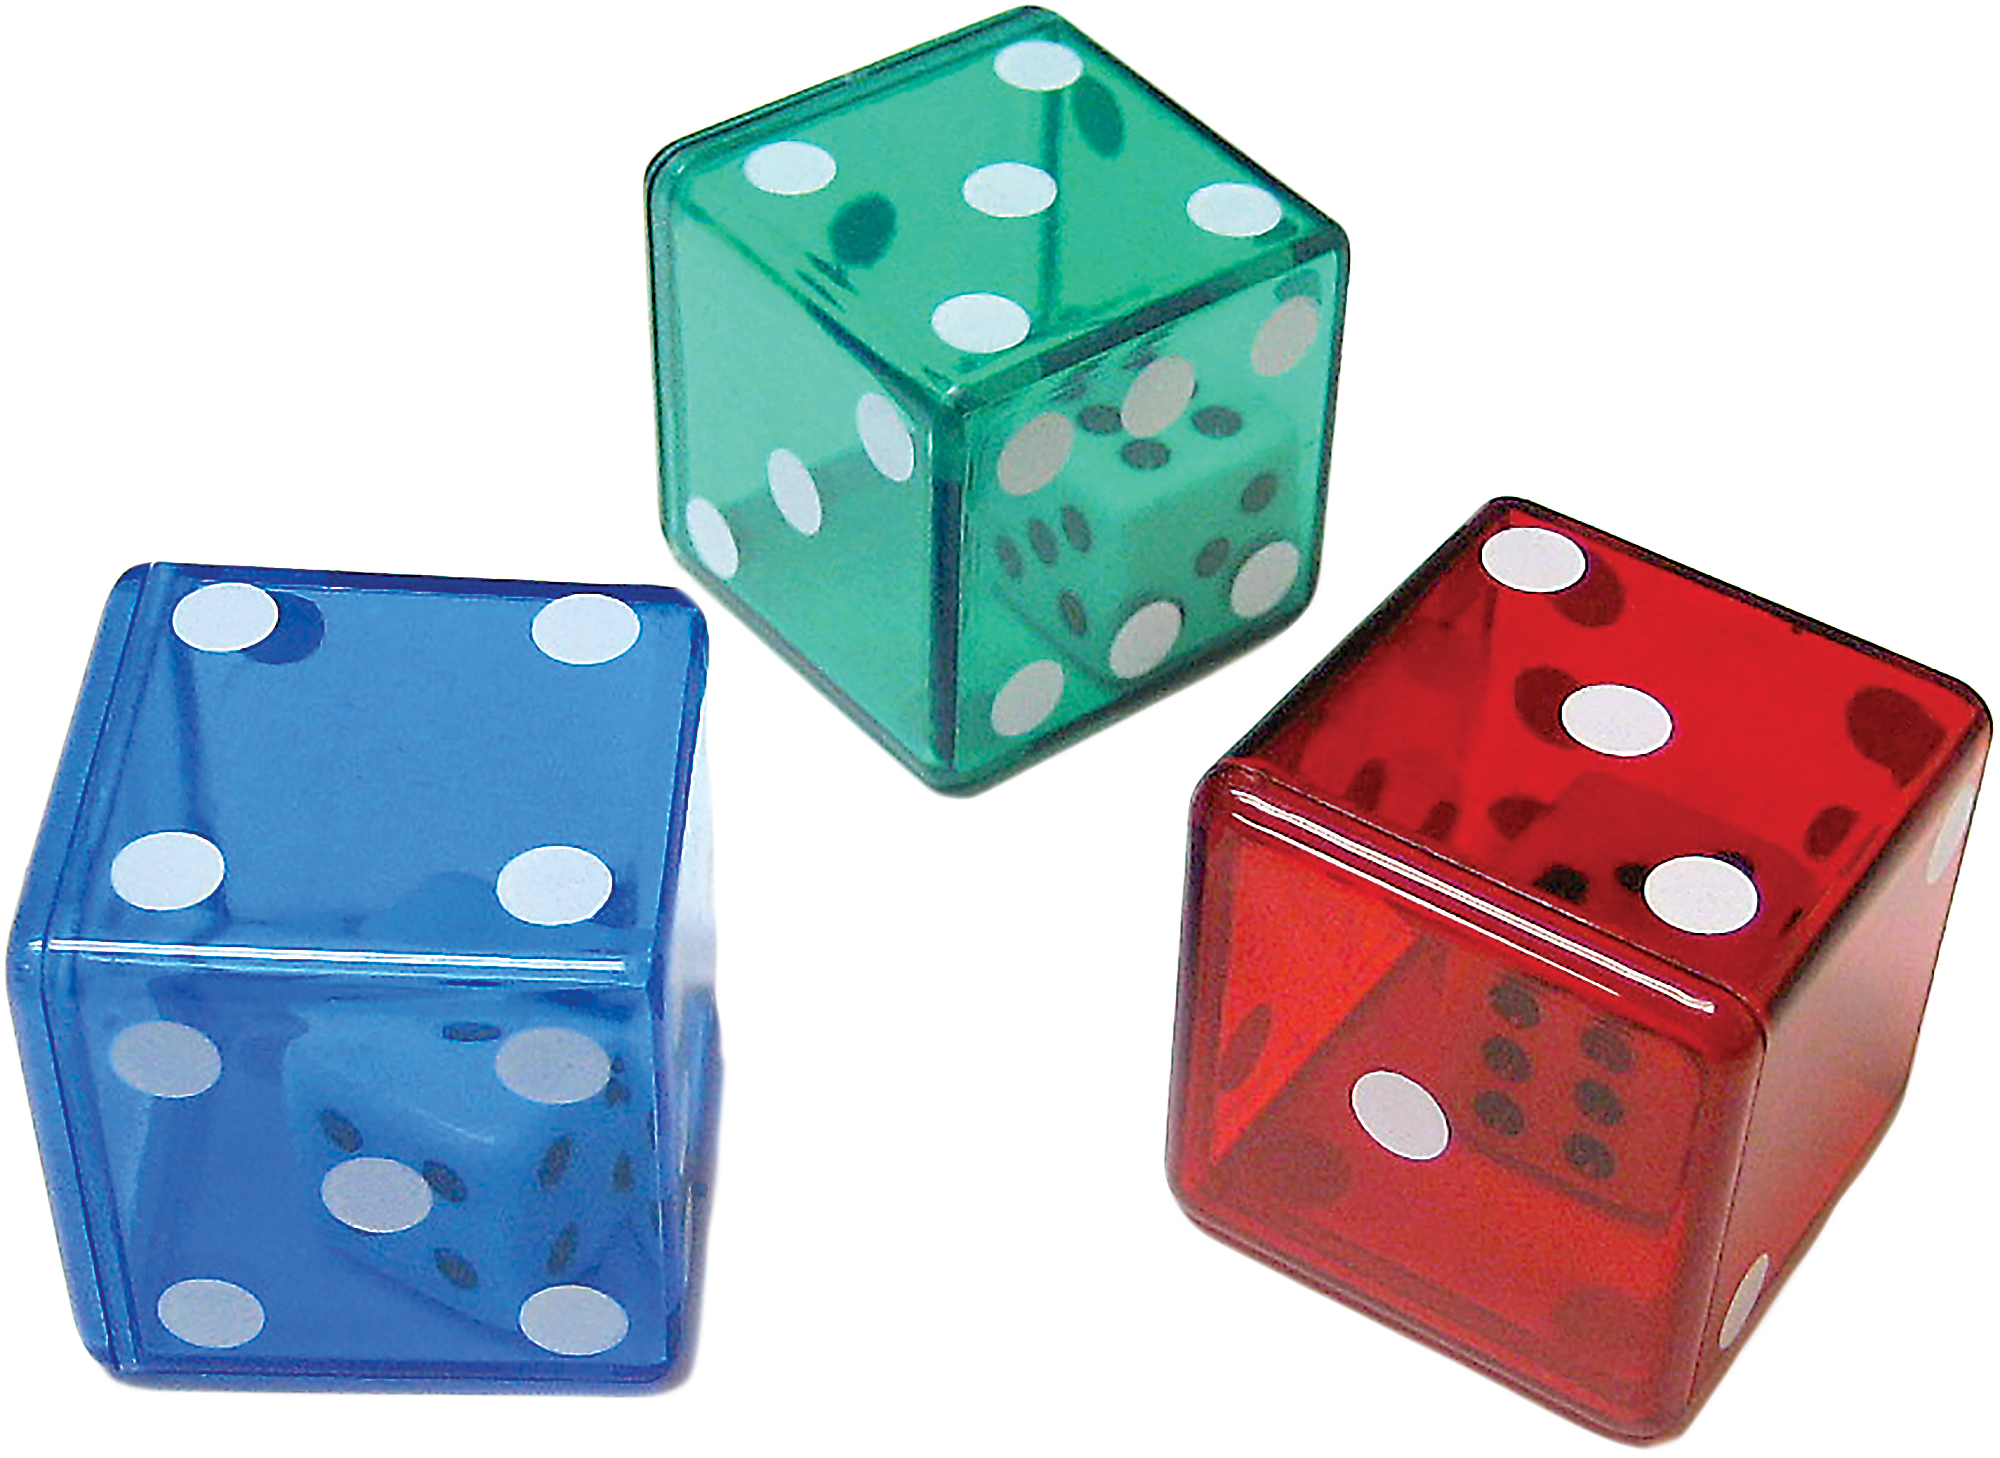 Dice Within Dice - TCR20629 | Teacher Created Resources